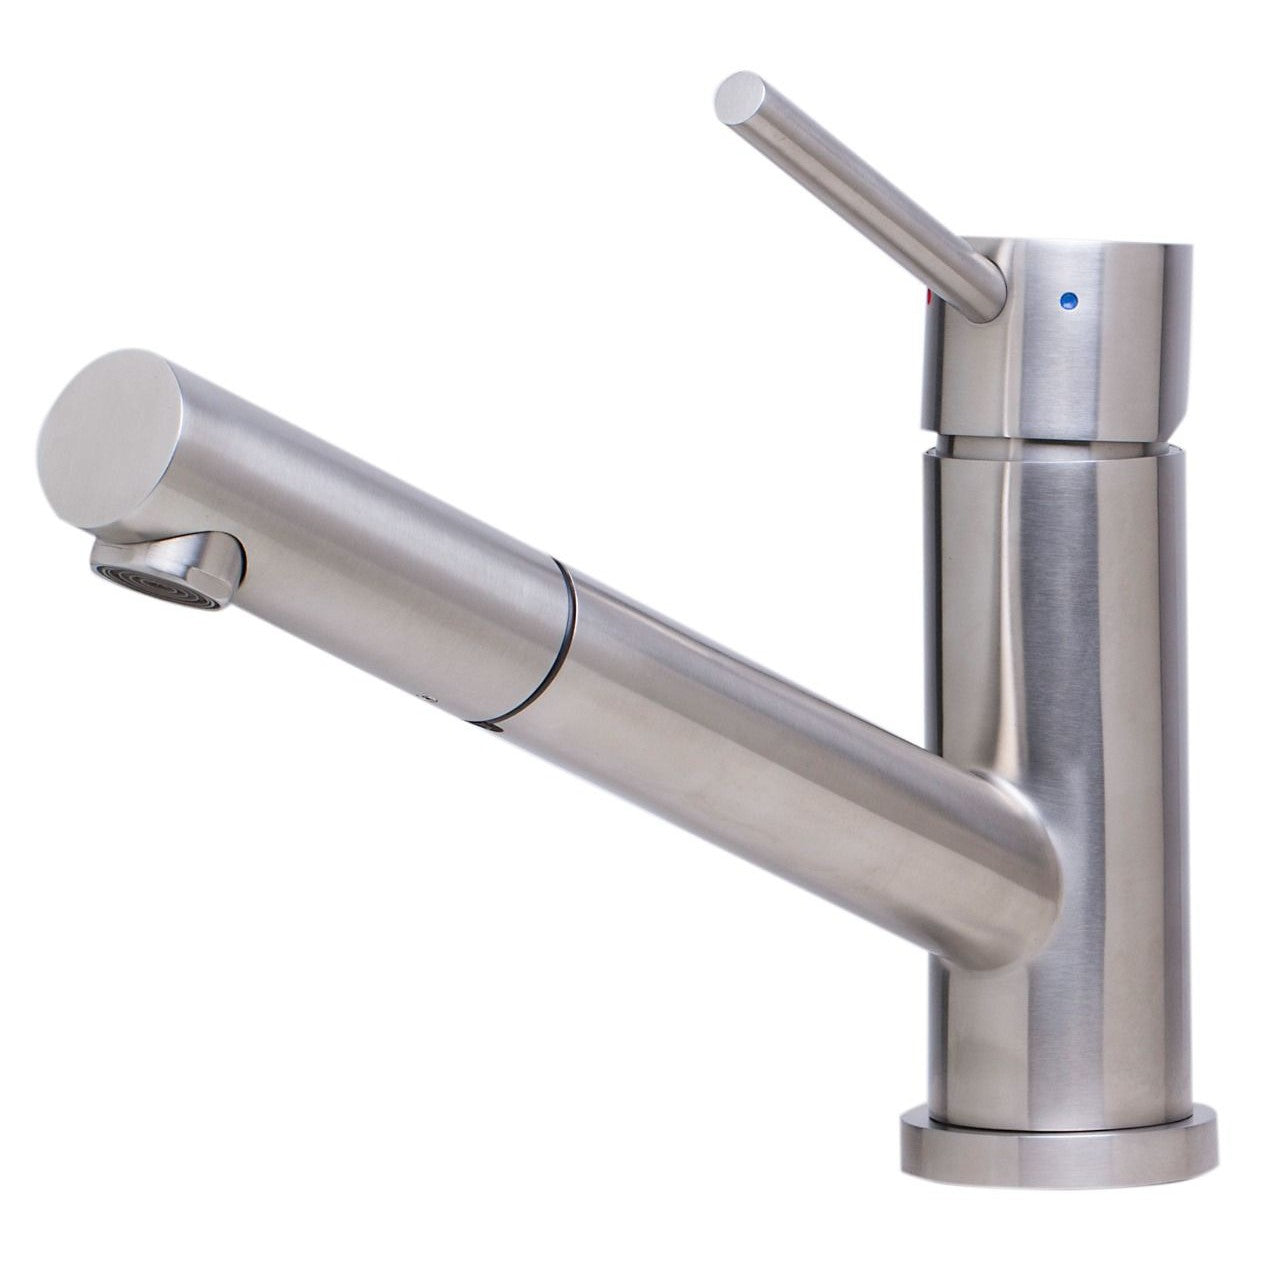 ALFI Brand AB2025-BSS Solid Brushed Stainless Steel Pull Out Single Hole Kitchen Faucet